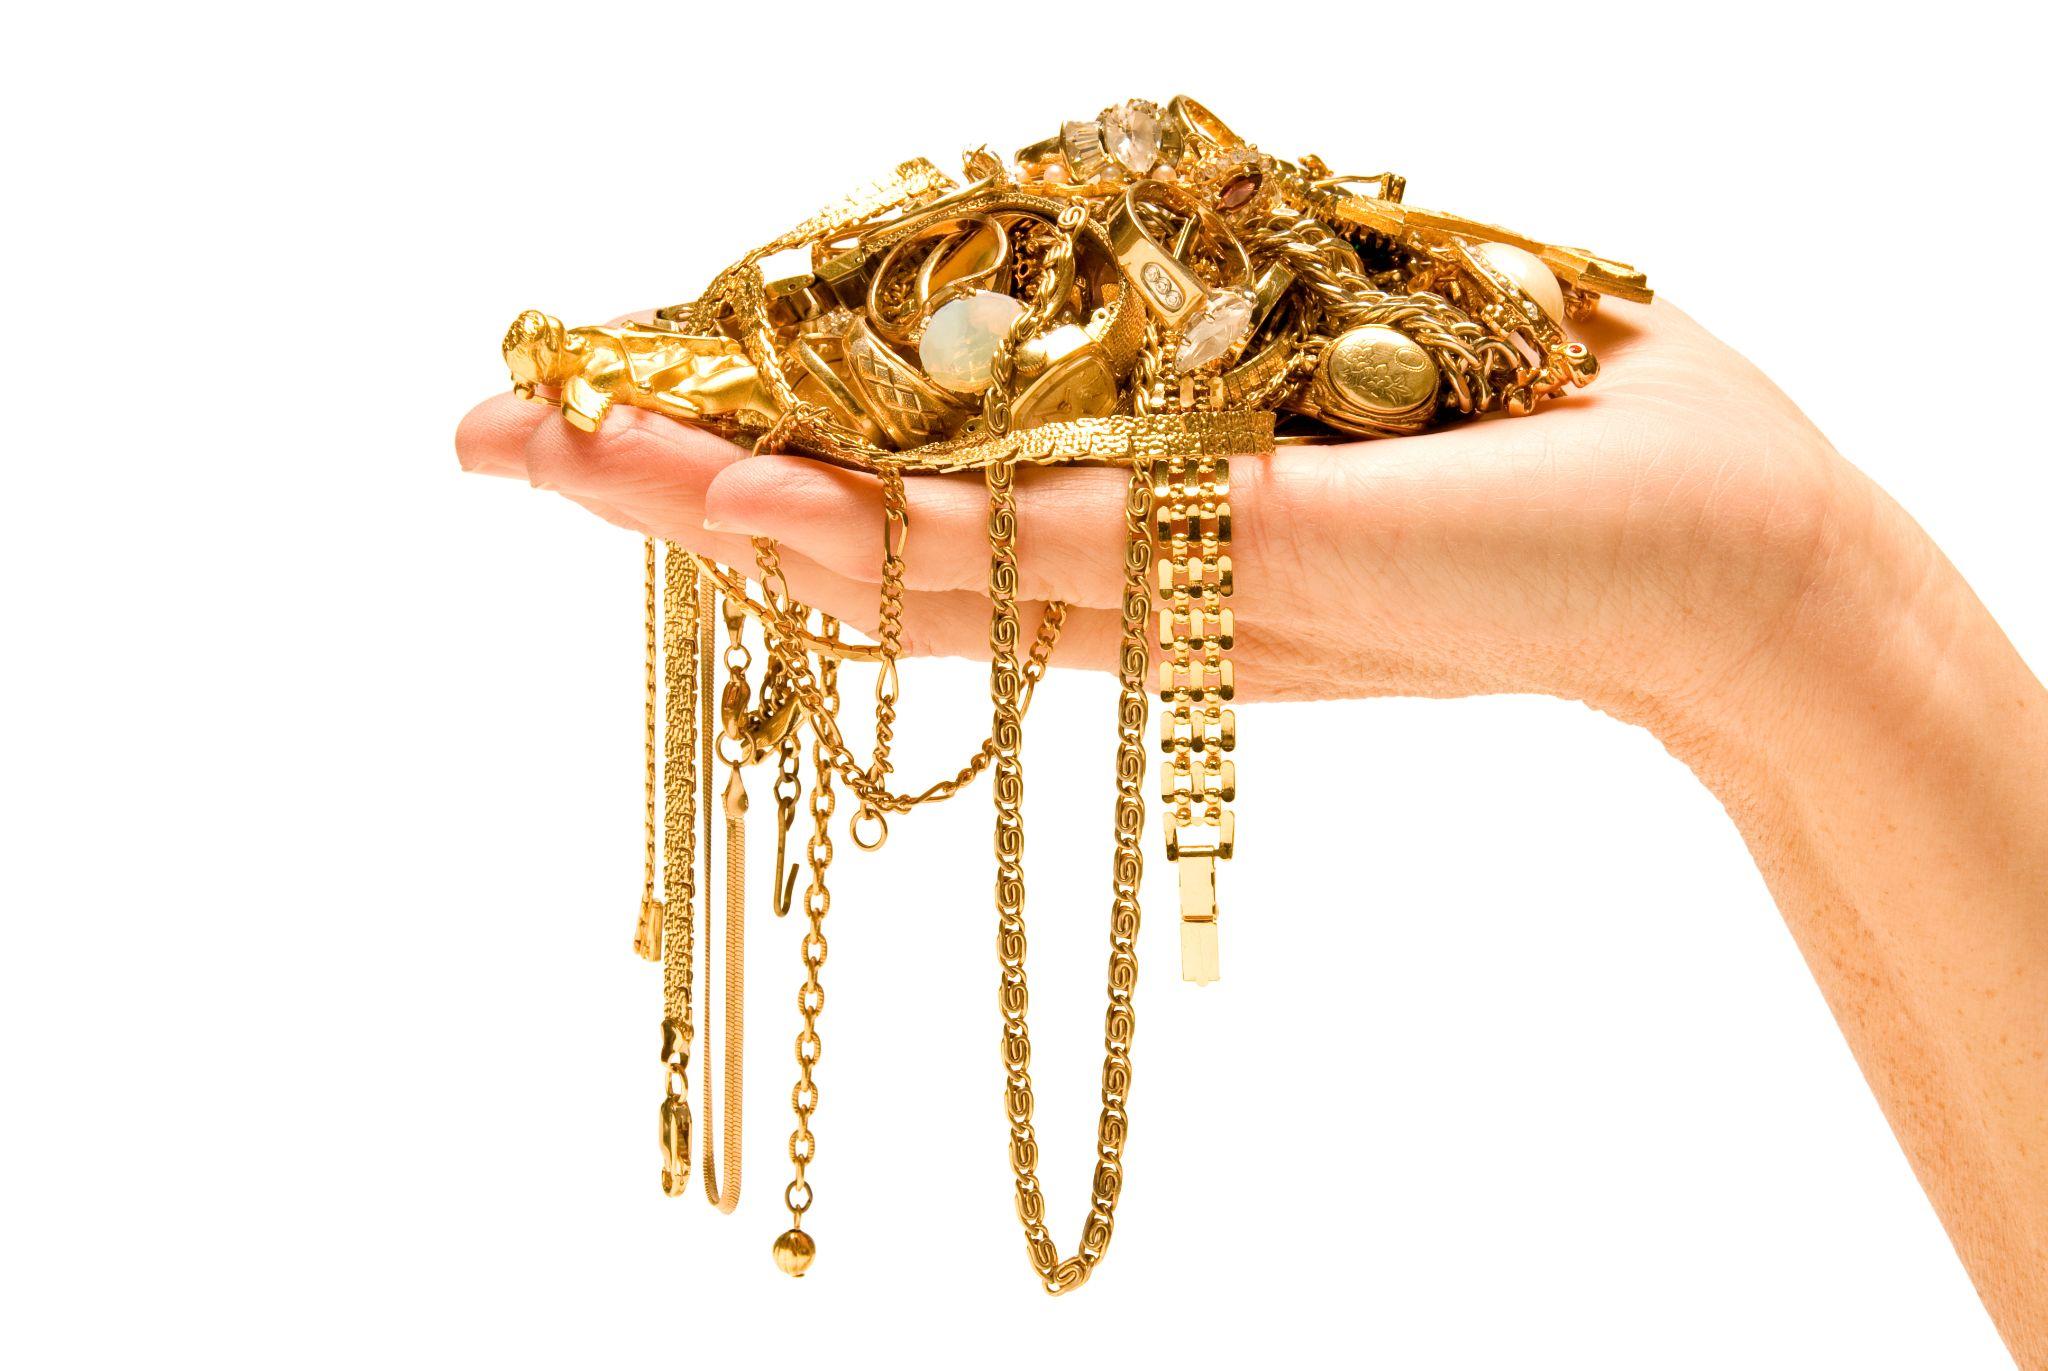 Hand holding beautiful gold ready to sell.